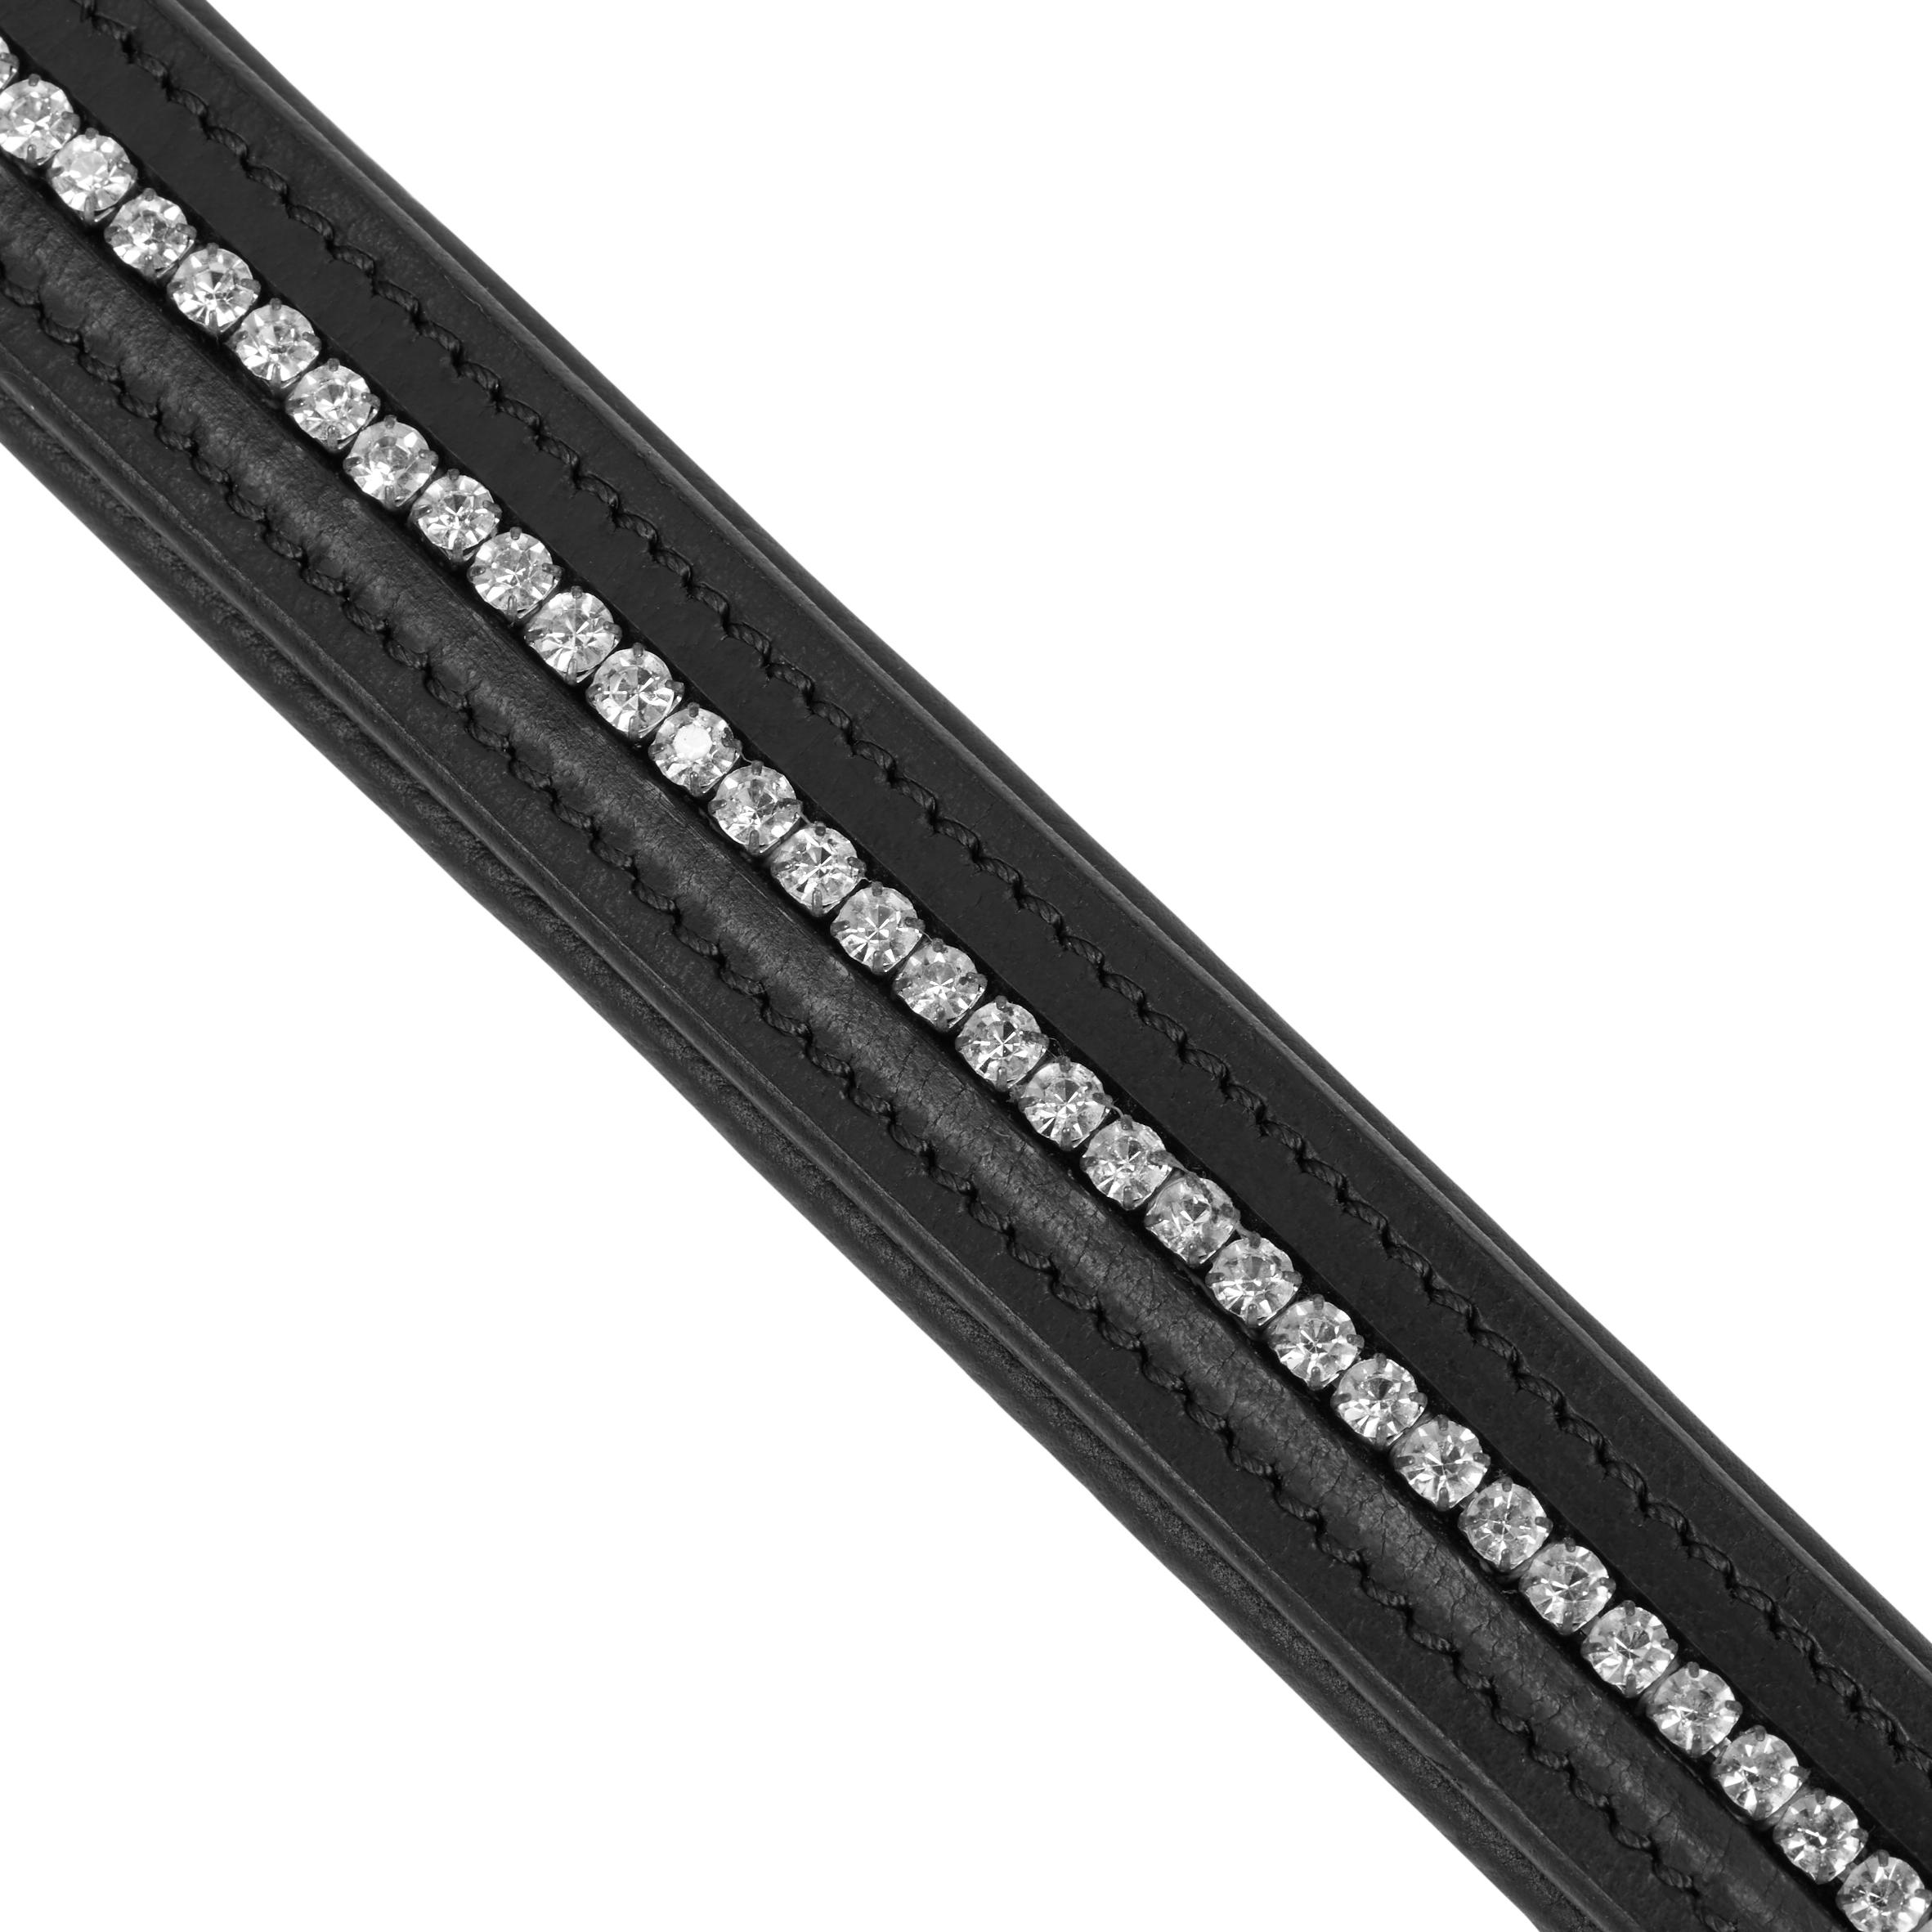 500 Strass Horse Riding Brow Band for Horse - Black 2/3